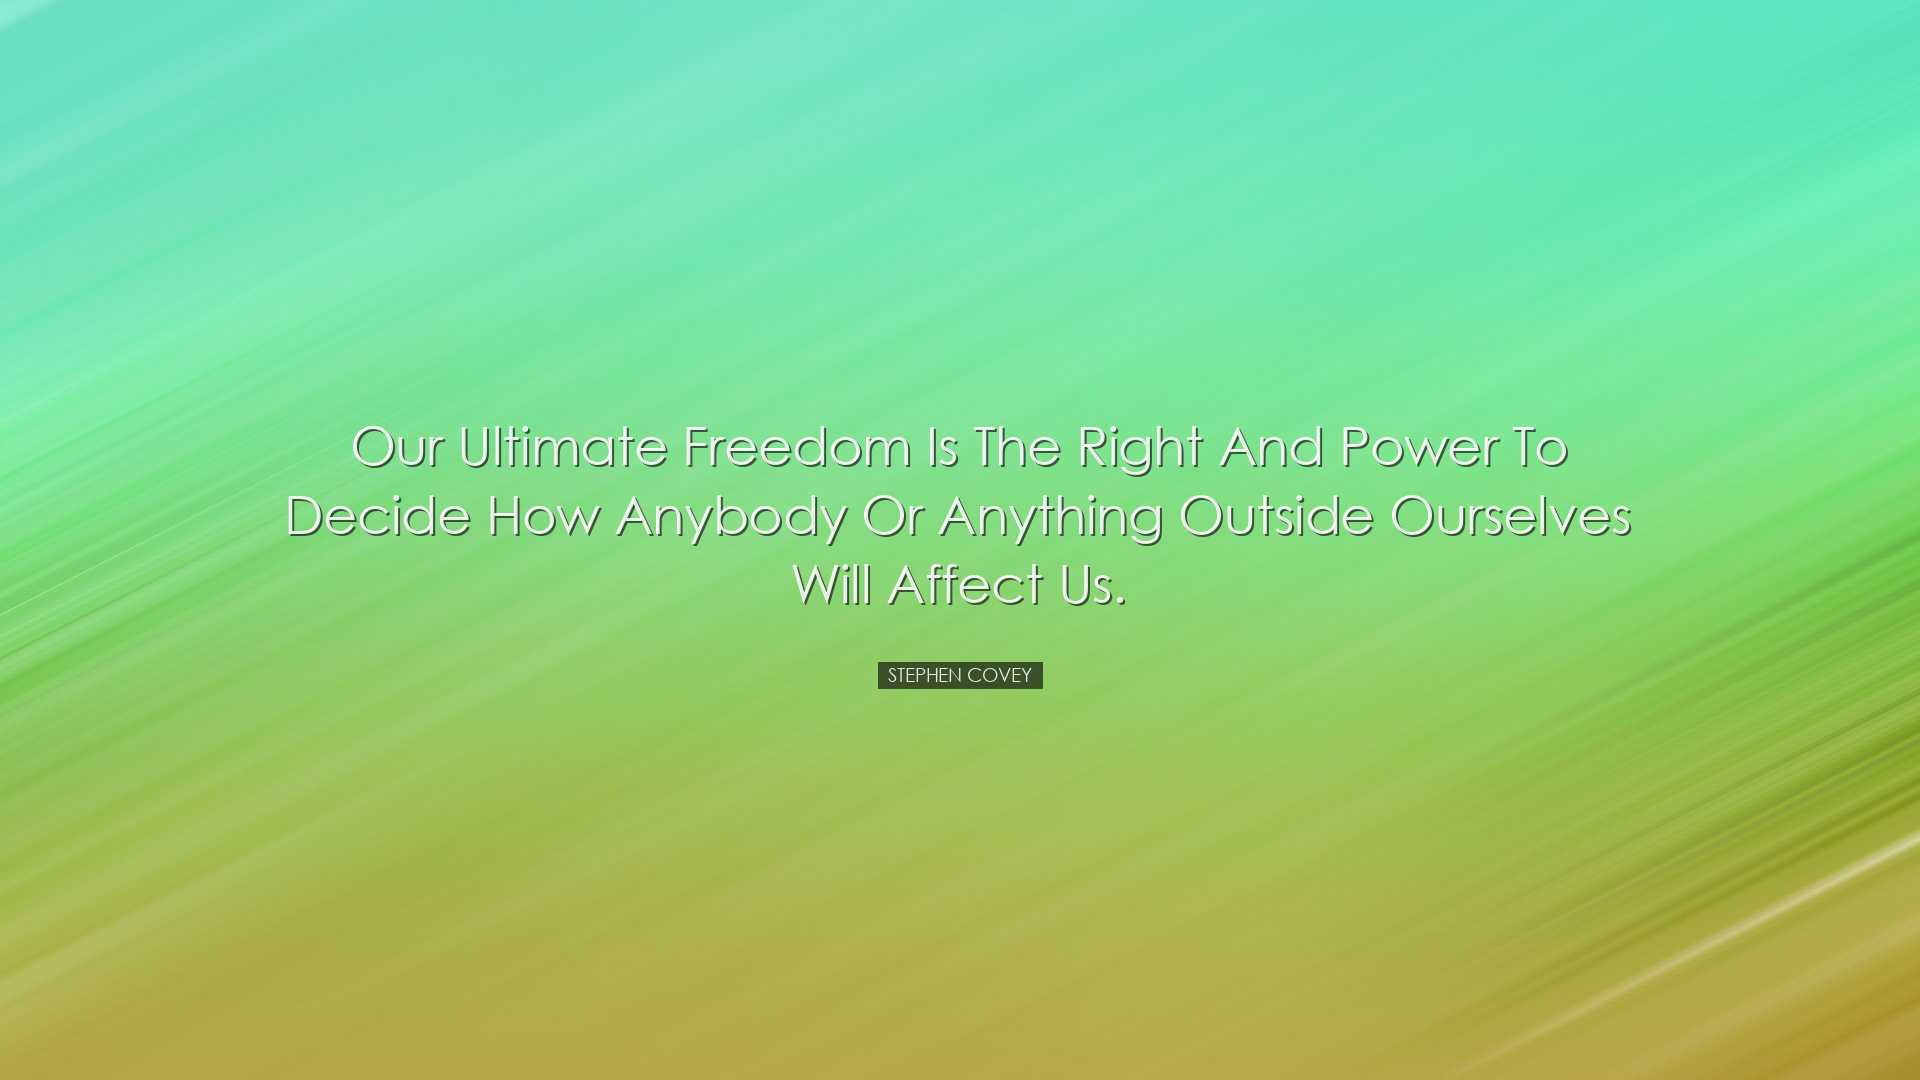 Our ultimate freedom is the right and power to decide how anybody